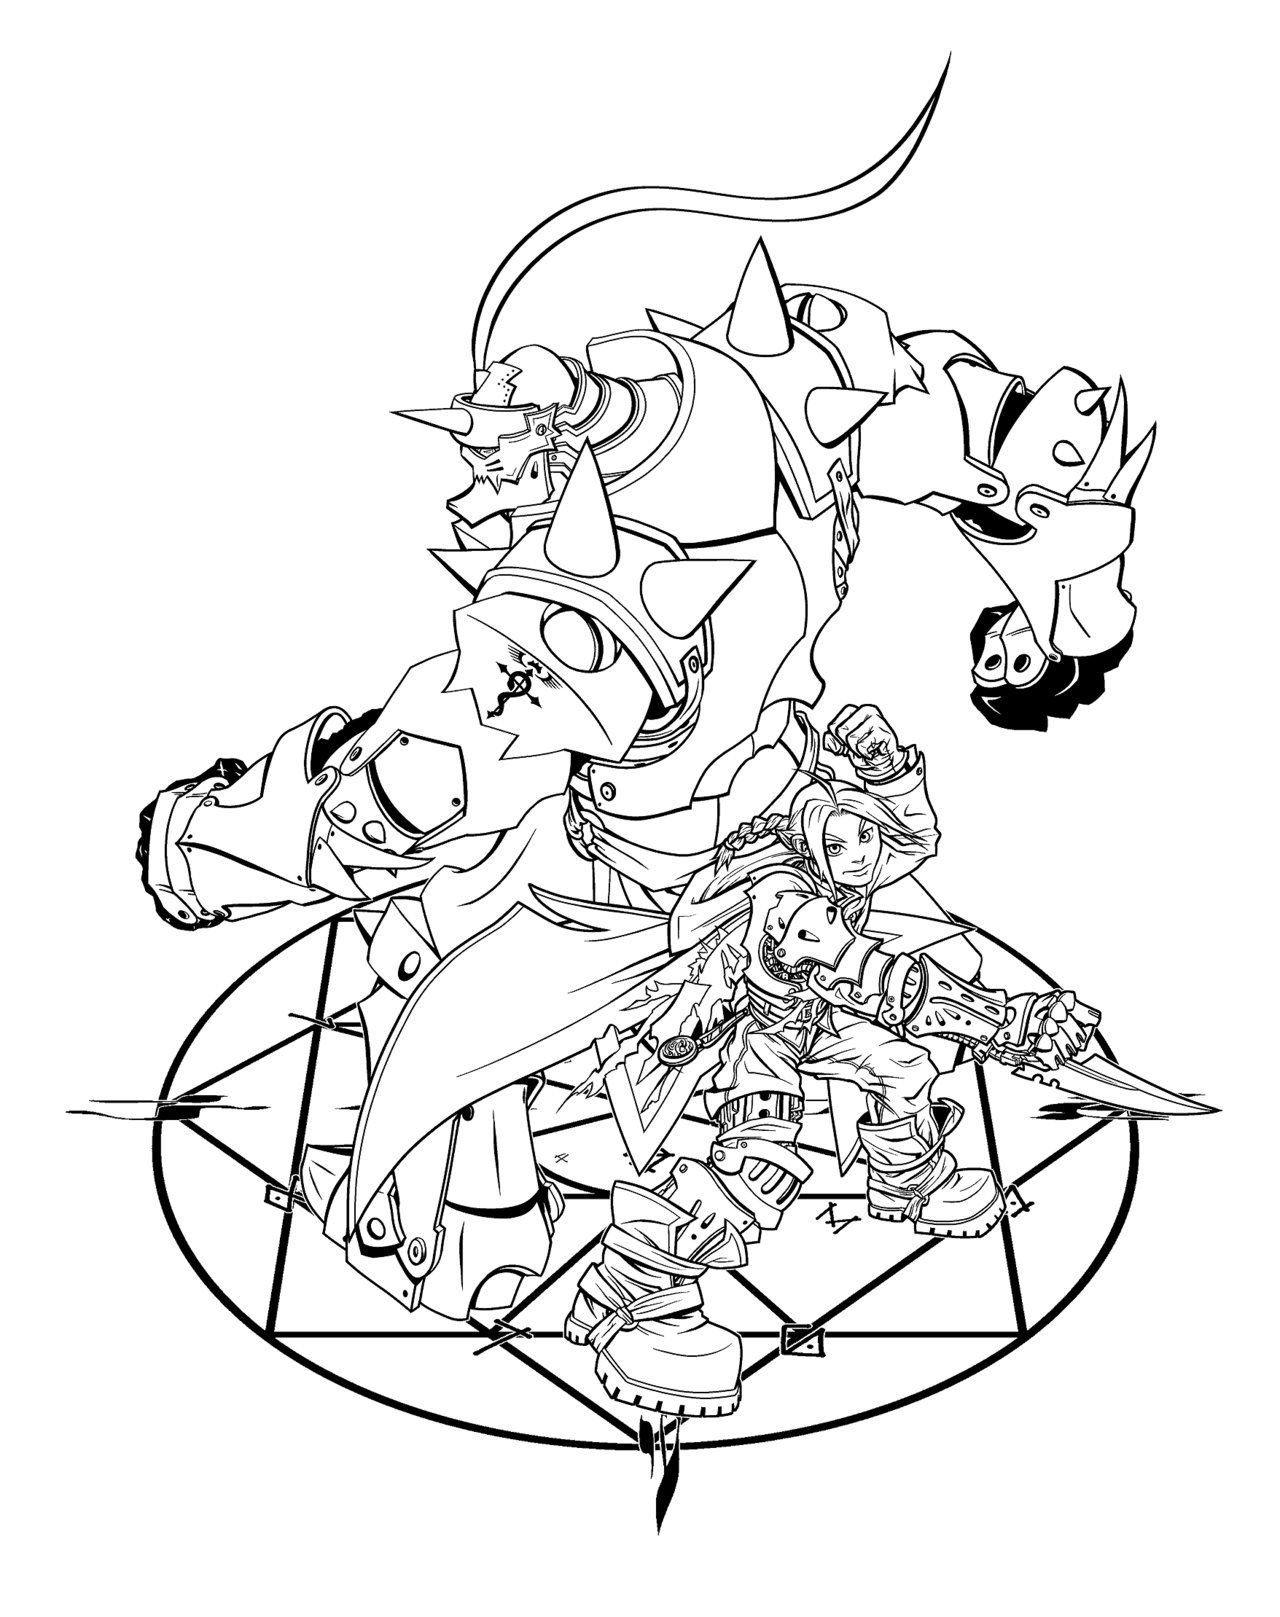 Full Metal Alchemist Coloring Page for Kids